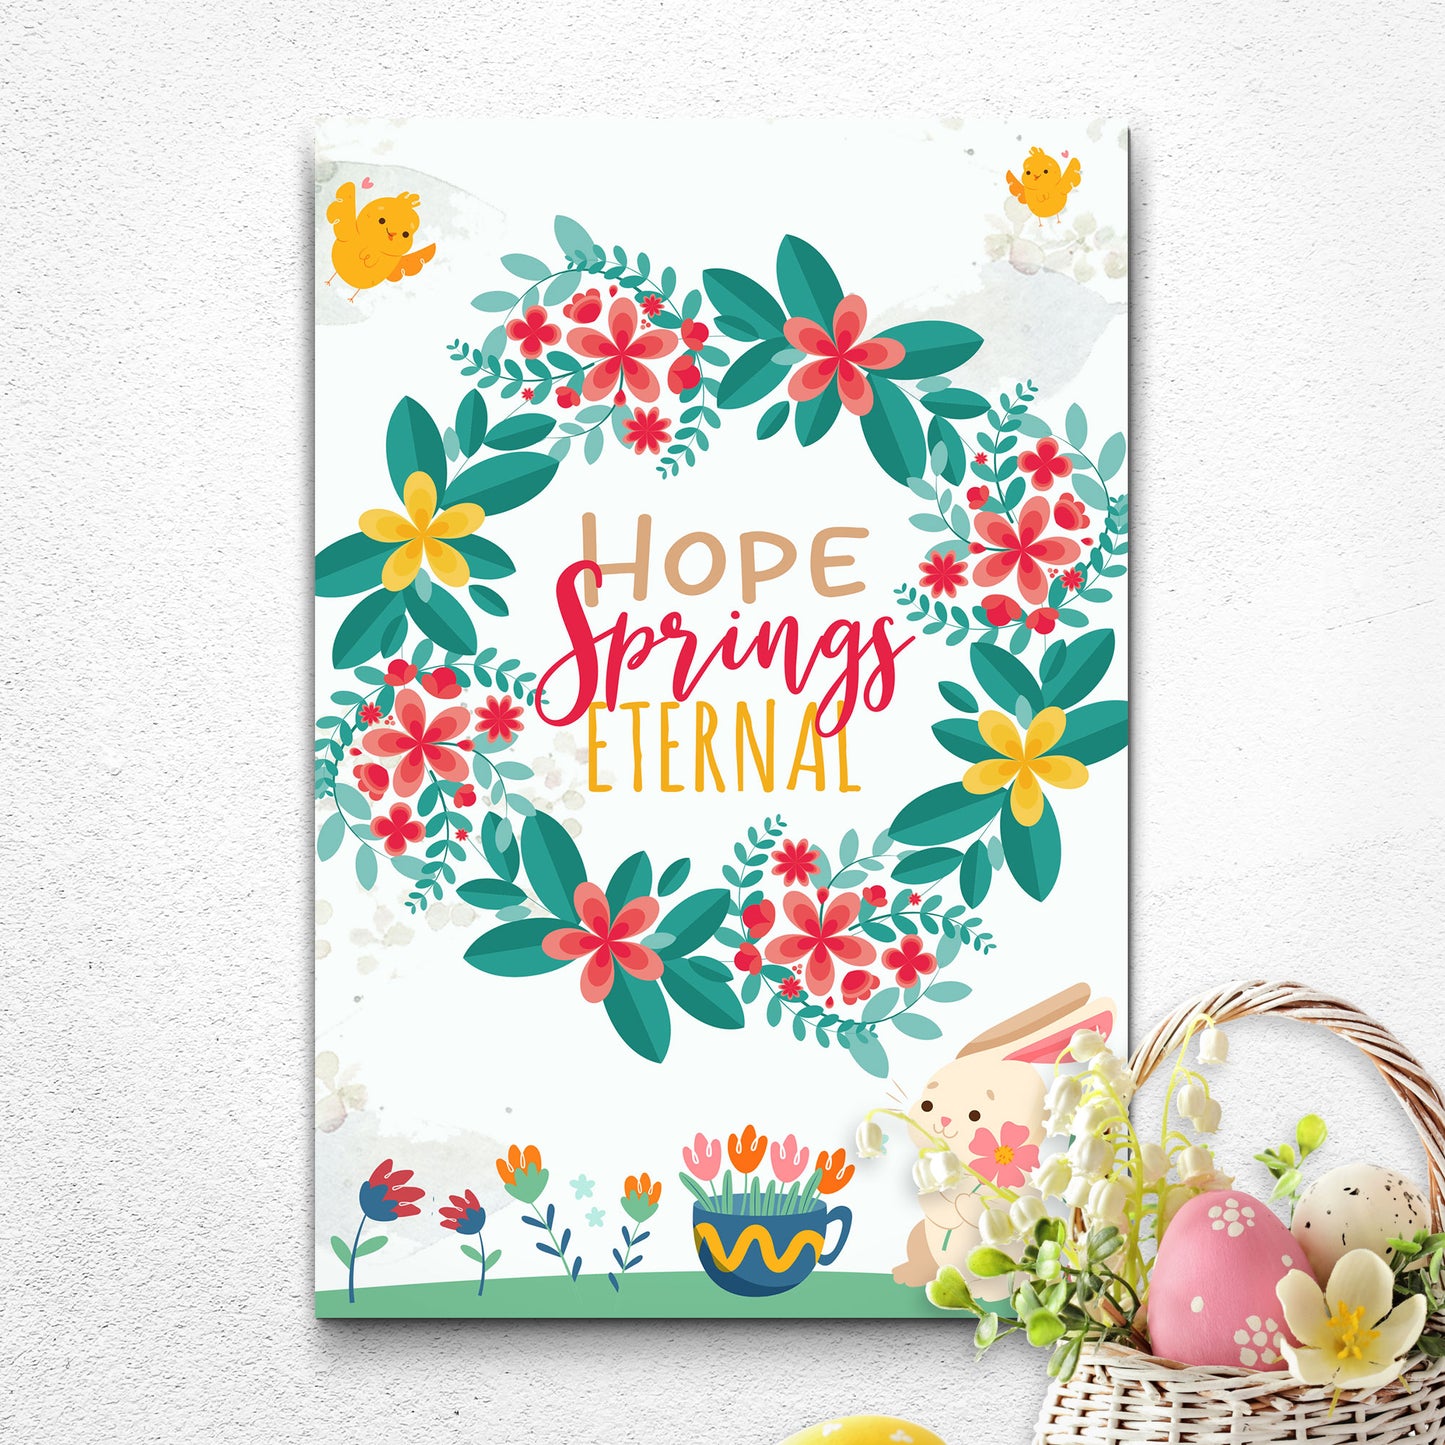 Hope Springs Eternal Sign Style 1 - Image by Tailored Canvases